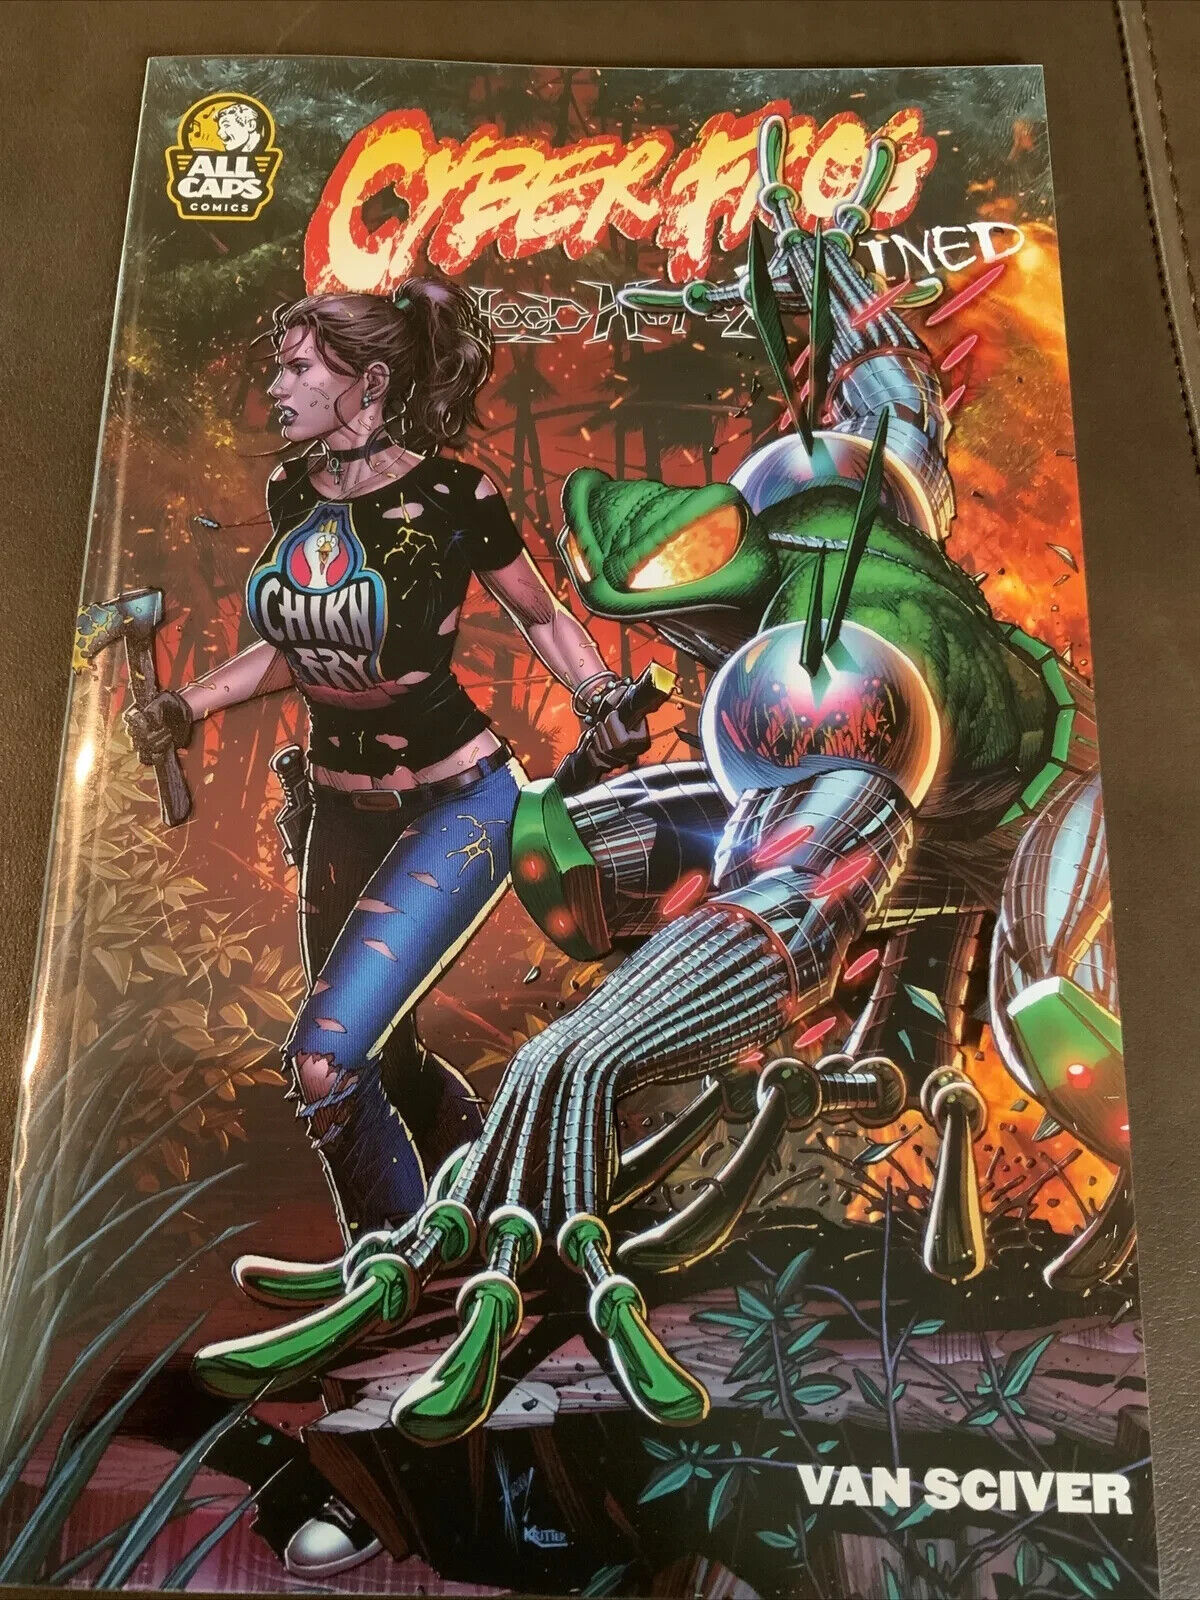 CYBERFROG: BLOODHONEY DRAINED Acetate cover FROG & HEATHER EDITION